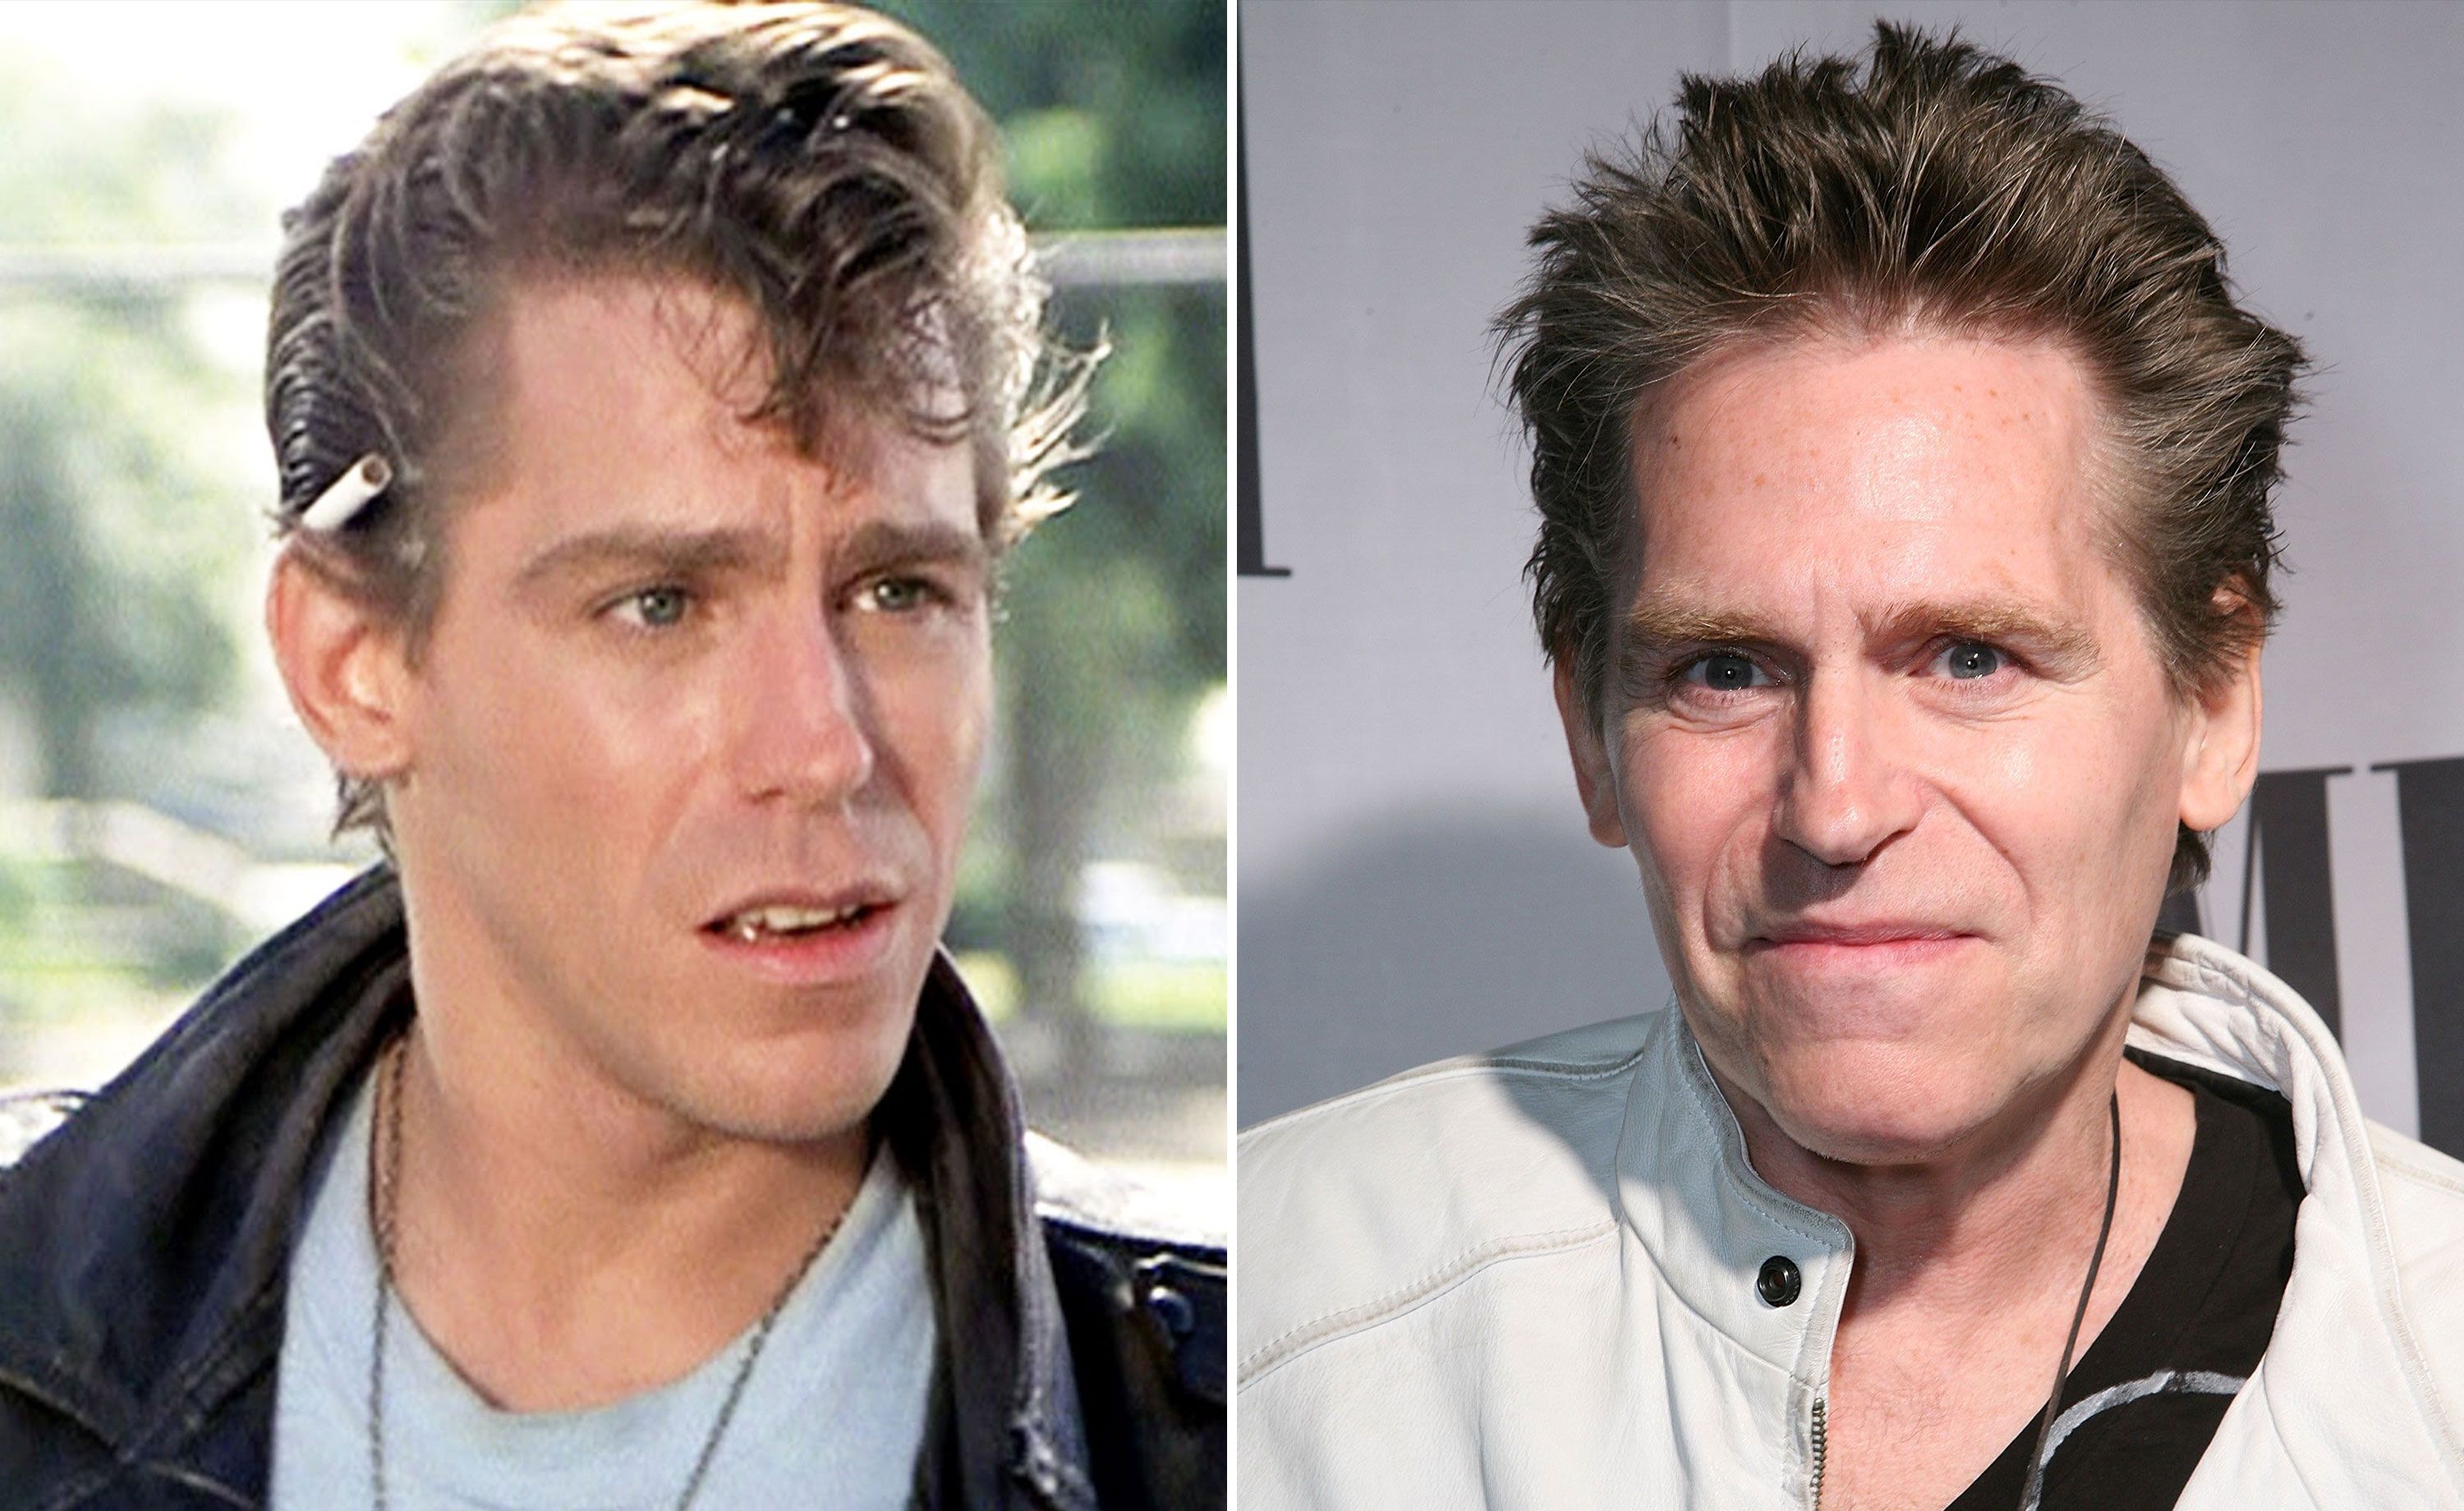 Grease cast - Where are they now and what do they look like?